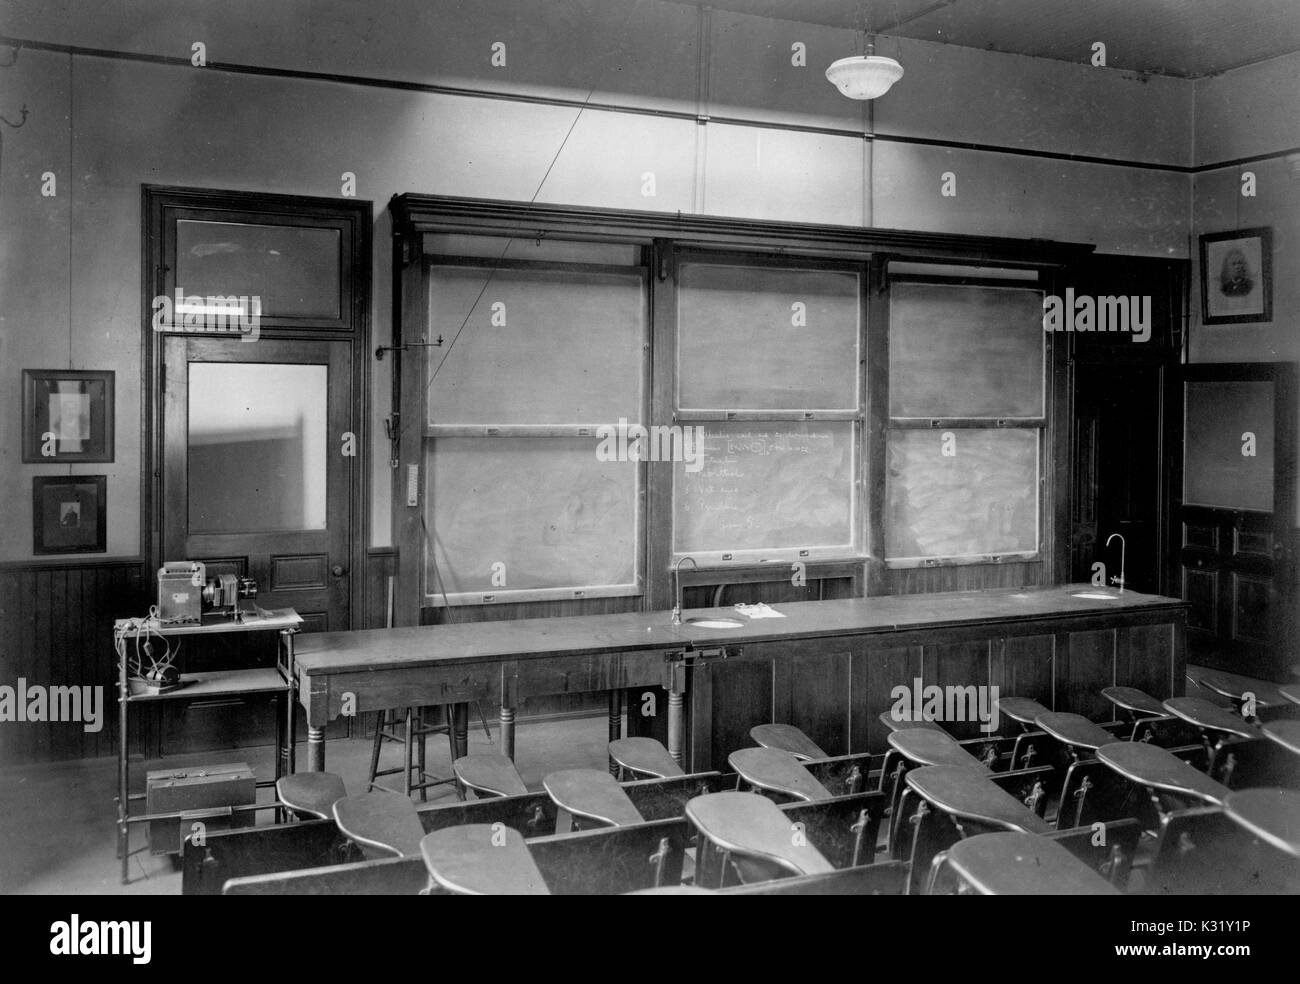 Sepia photograph of a third floor graduate lecture room inside the Chemistry Building at Old Campus Johns Hopkins University, showing rows of empty auditorium style desks facing the front of the classroom, with a blackboard covered in Organic Chemistry problems, Baltimore, Maryland, 1918. Stock Photo